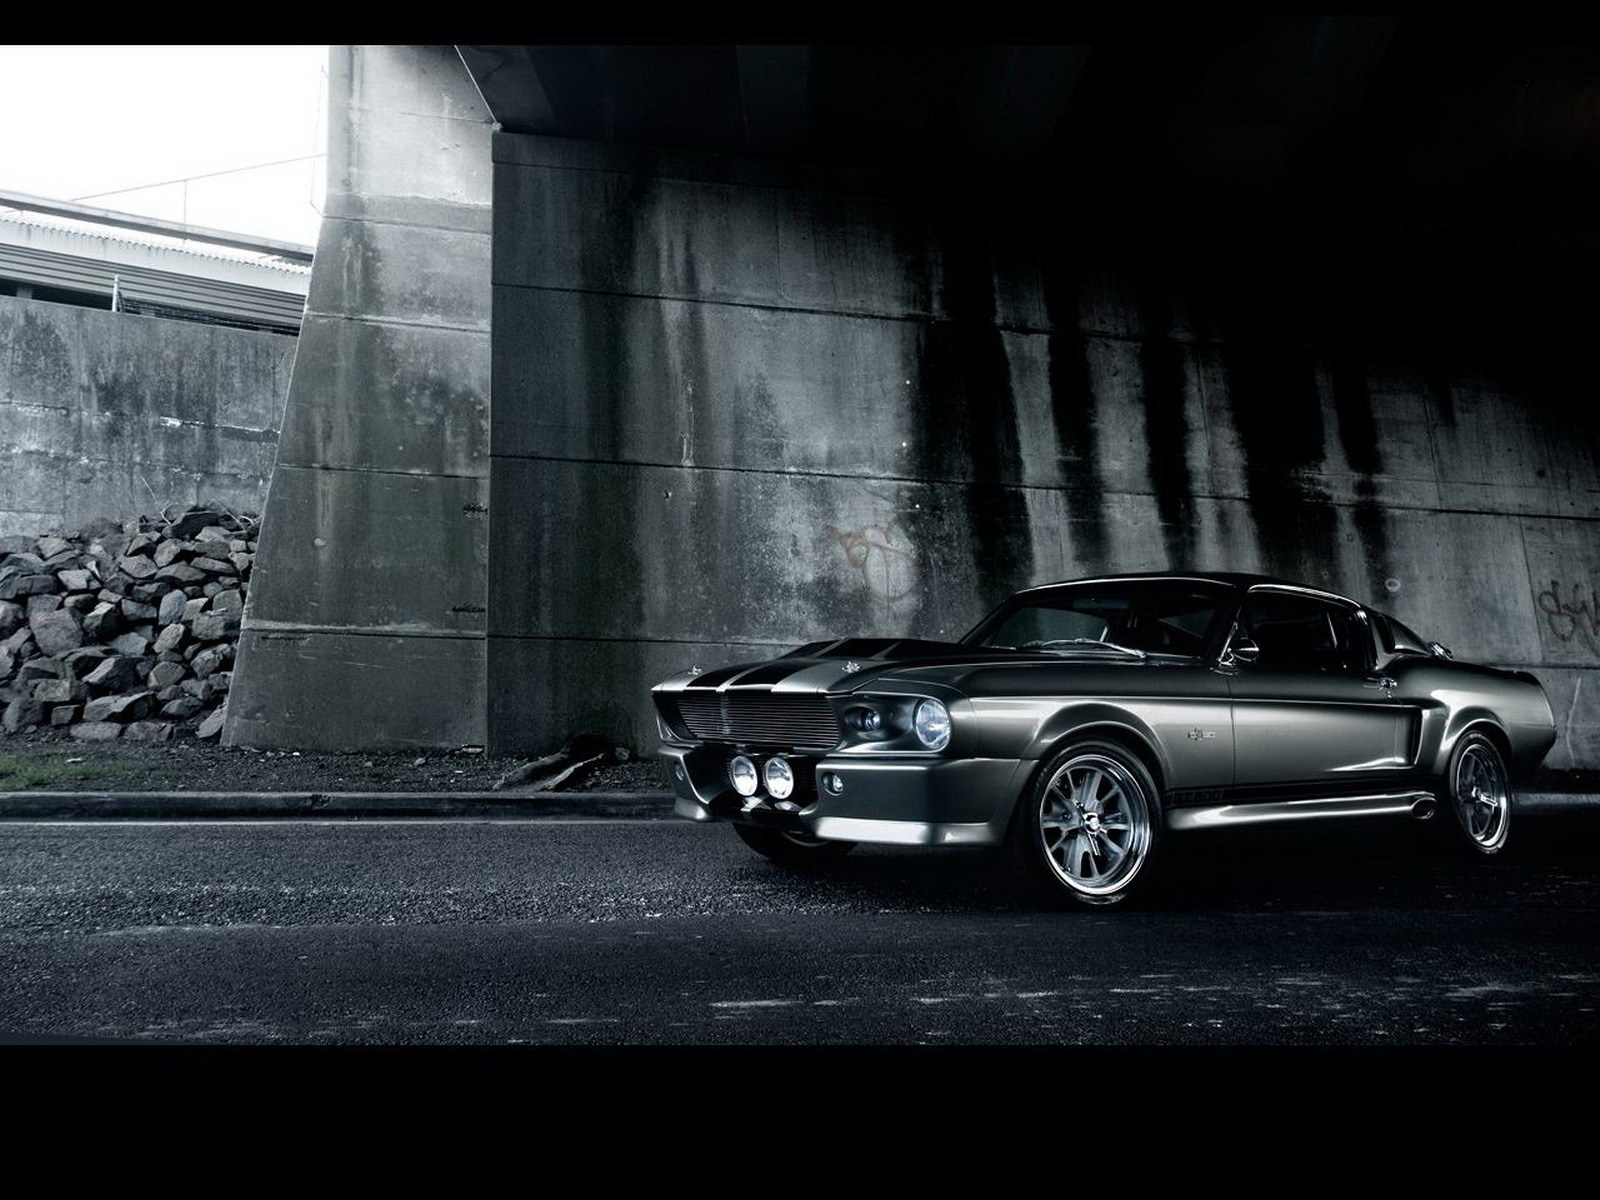 mustang, ford, transport, auto, art photo, black